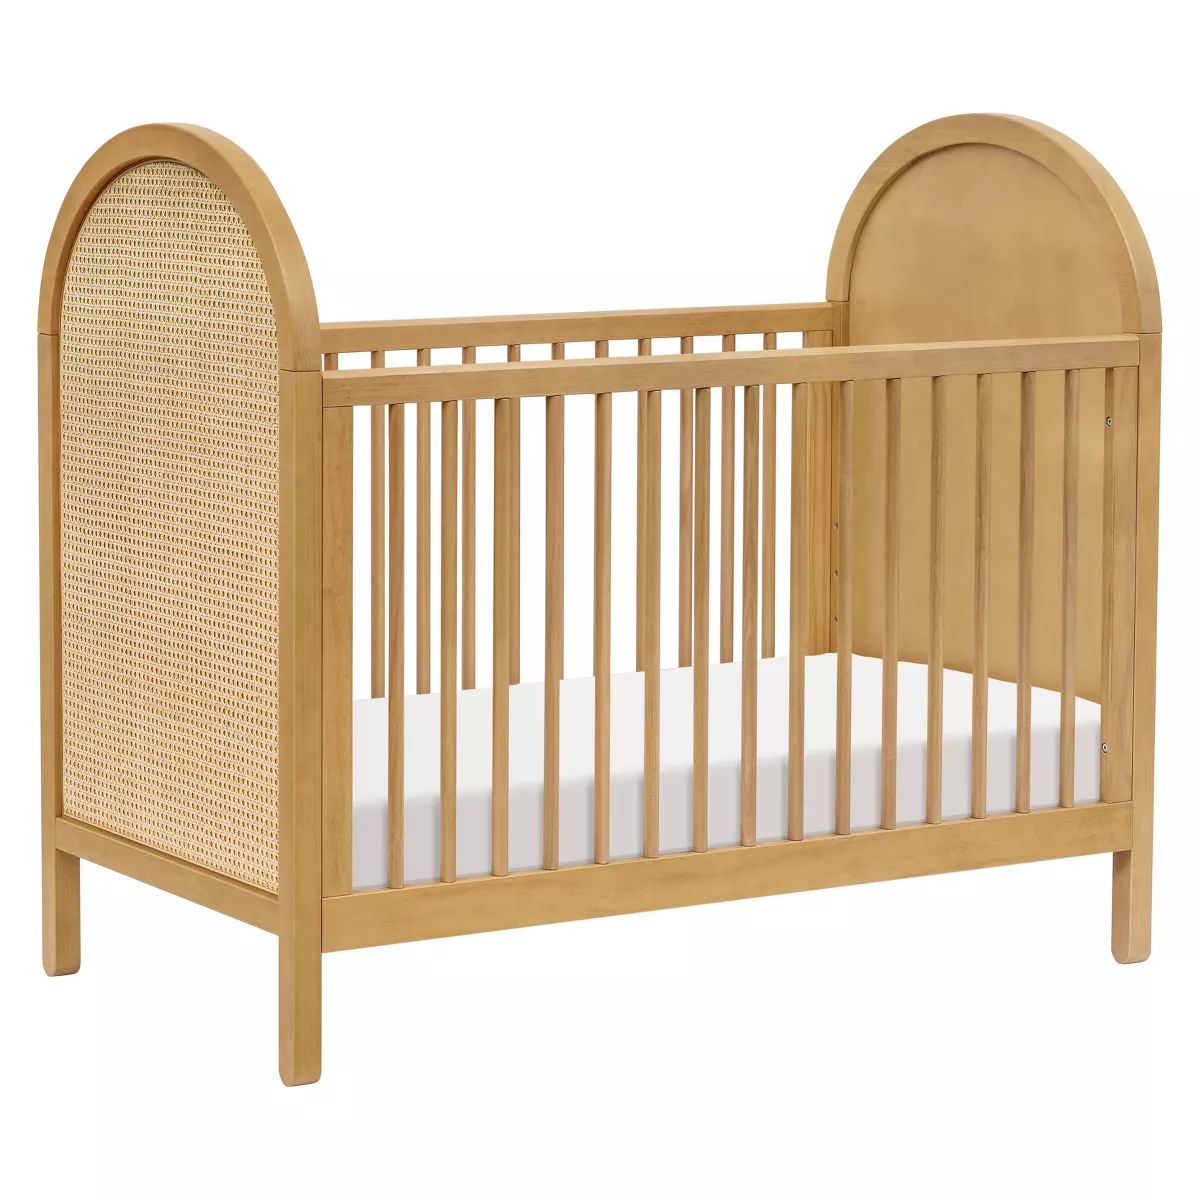 Babyletto Bondi Cane 3-in-1 Convertible Crib with Toddler Bed Kit - Honey/Natural Cane | Target